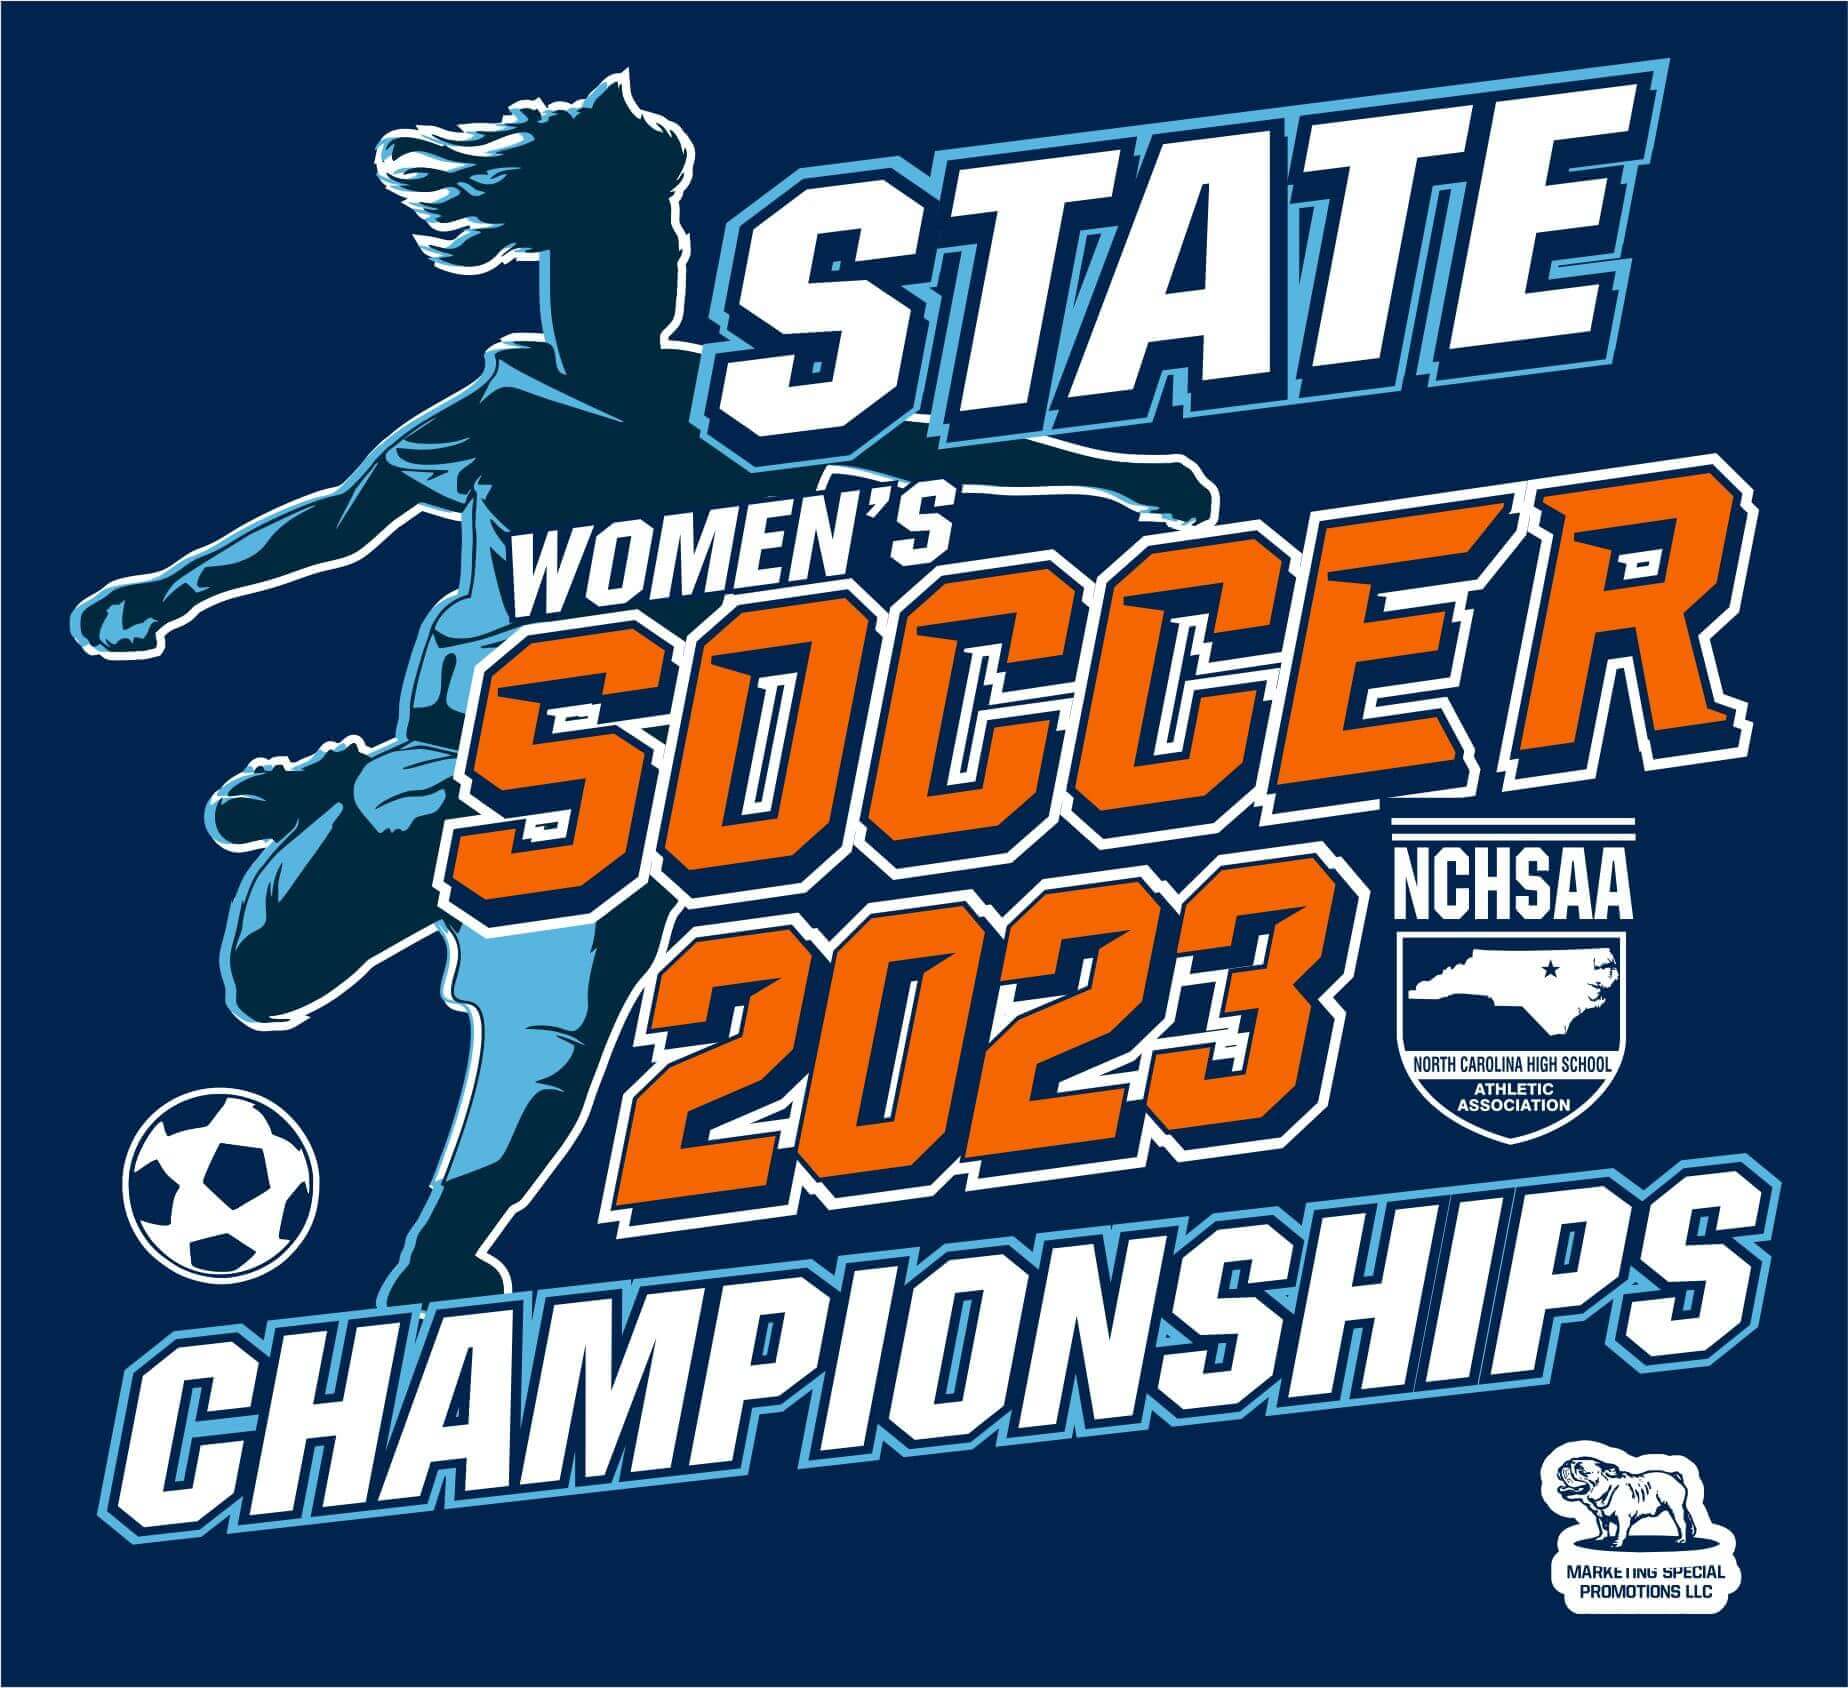 NCHSSA Women’s Soccer Marketing Special Promotions